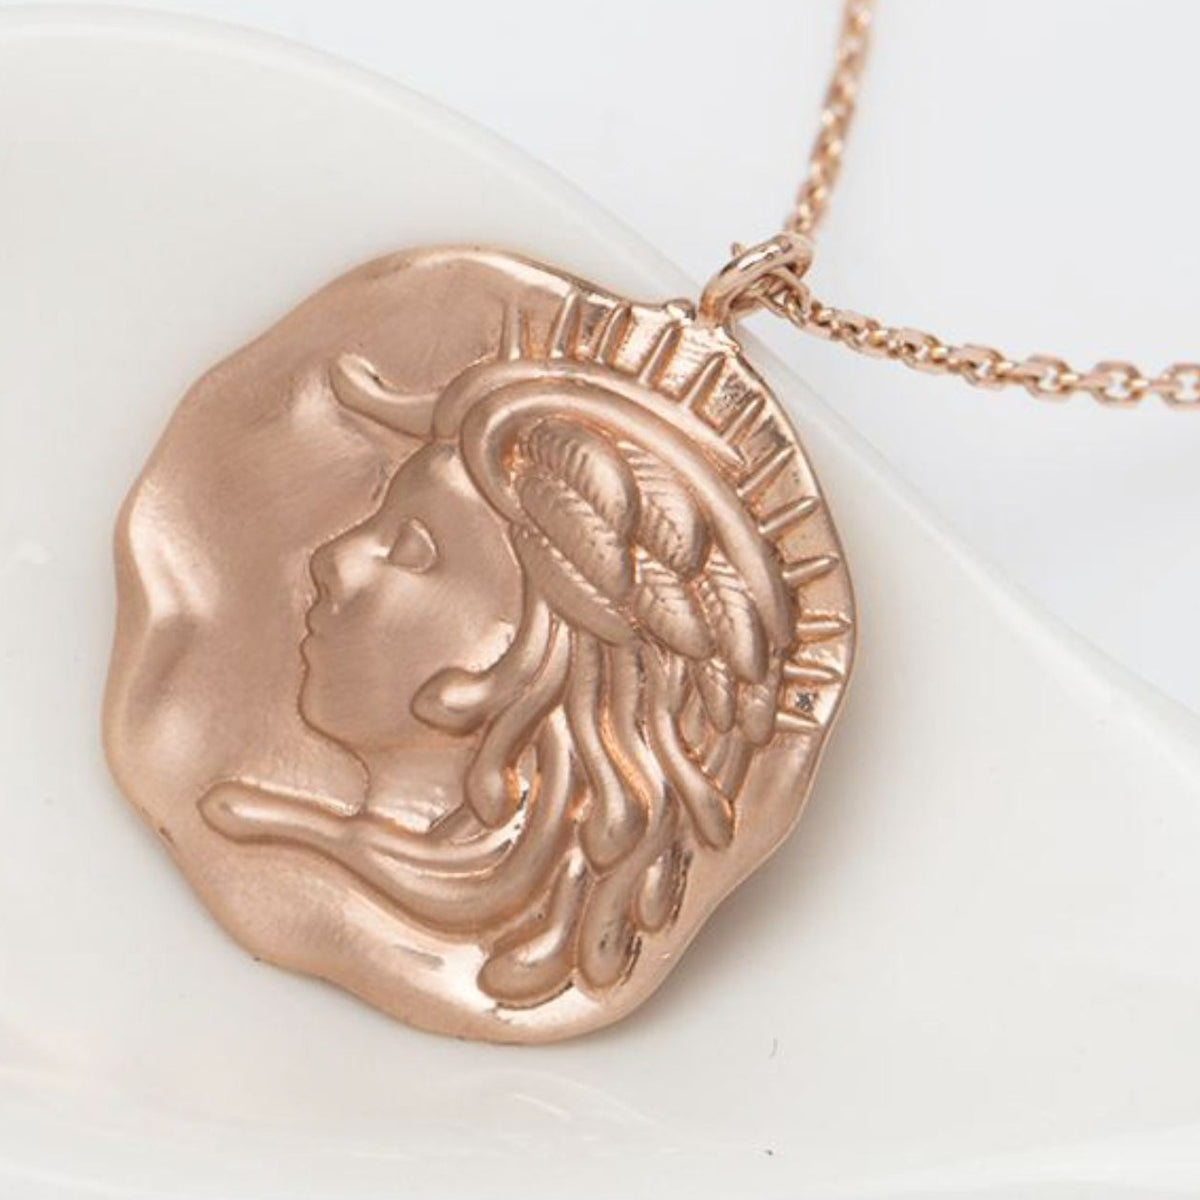 Rose Gold Heart Necklace – Antiques On Queen